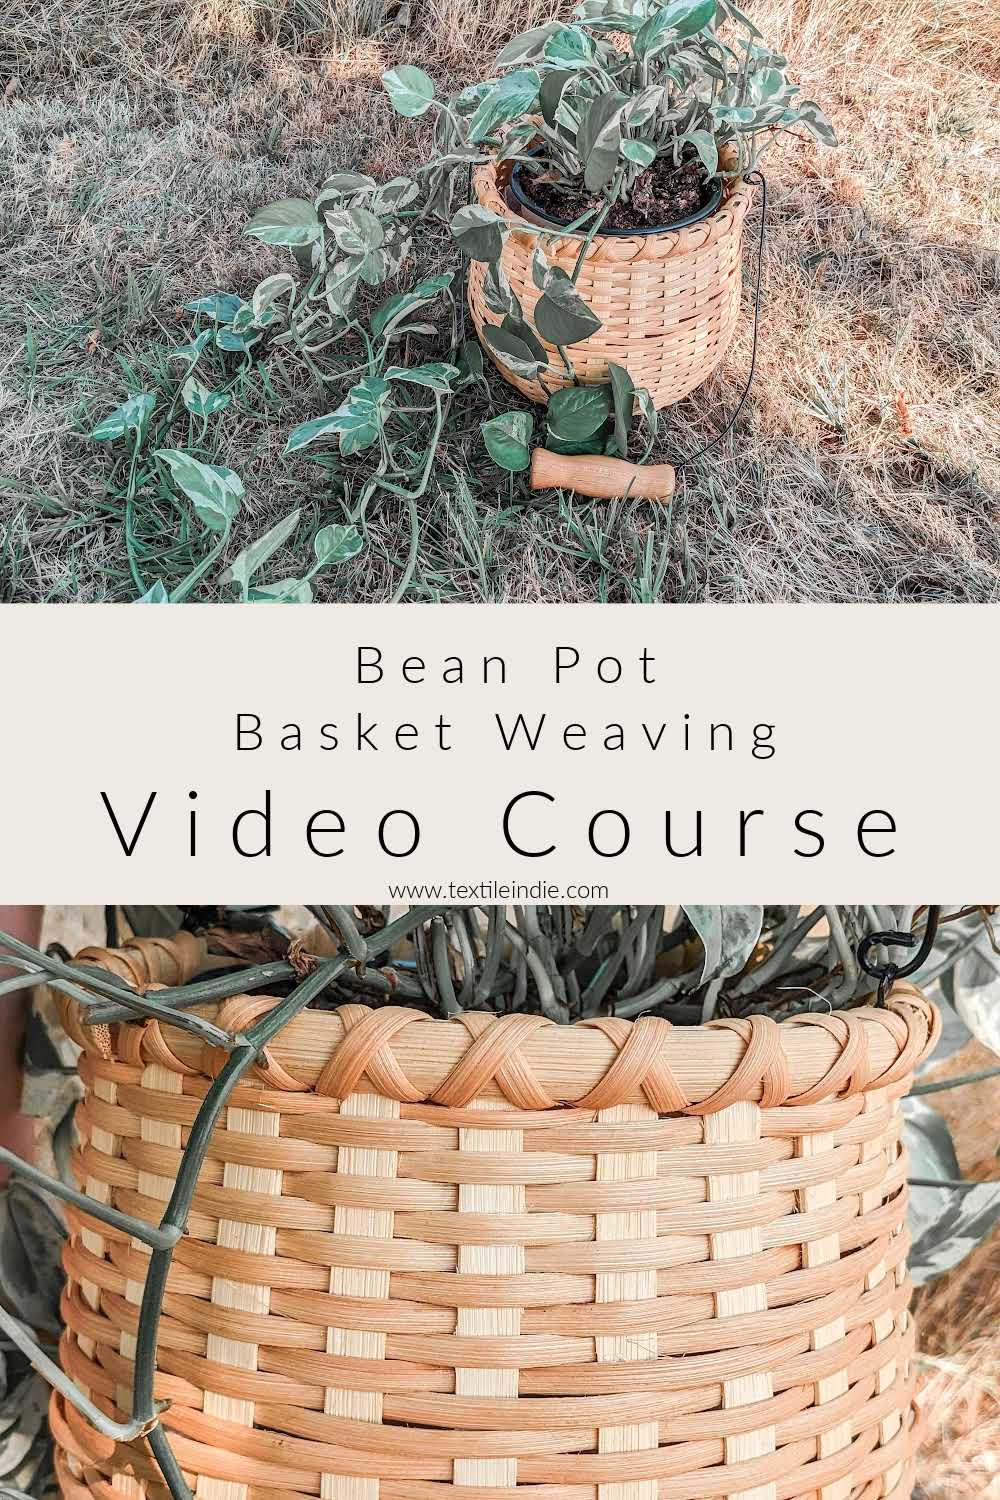 Guide to Basket Weaving Materials www.textileindie.com  #handwovenbasketmaterials #weavingbaskets #mat…